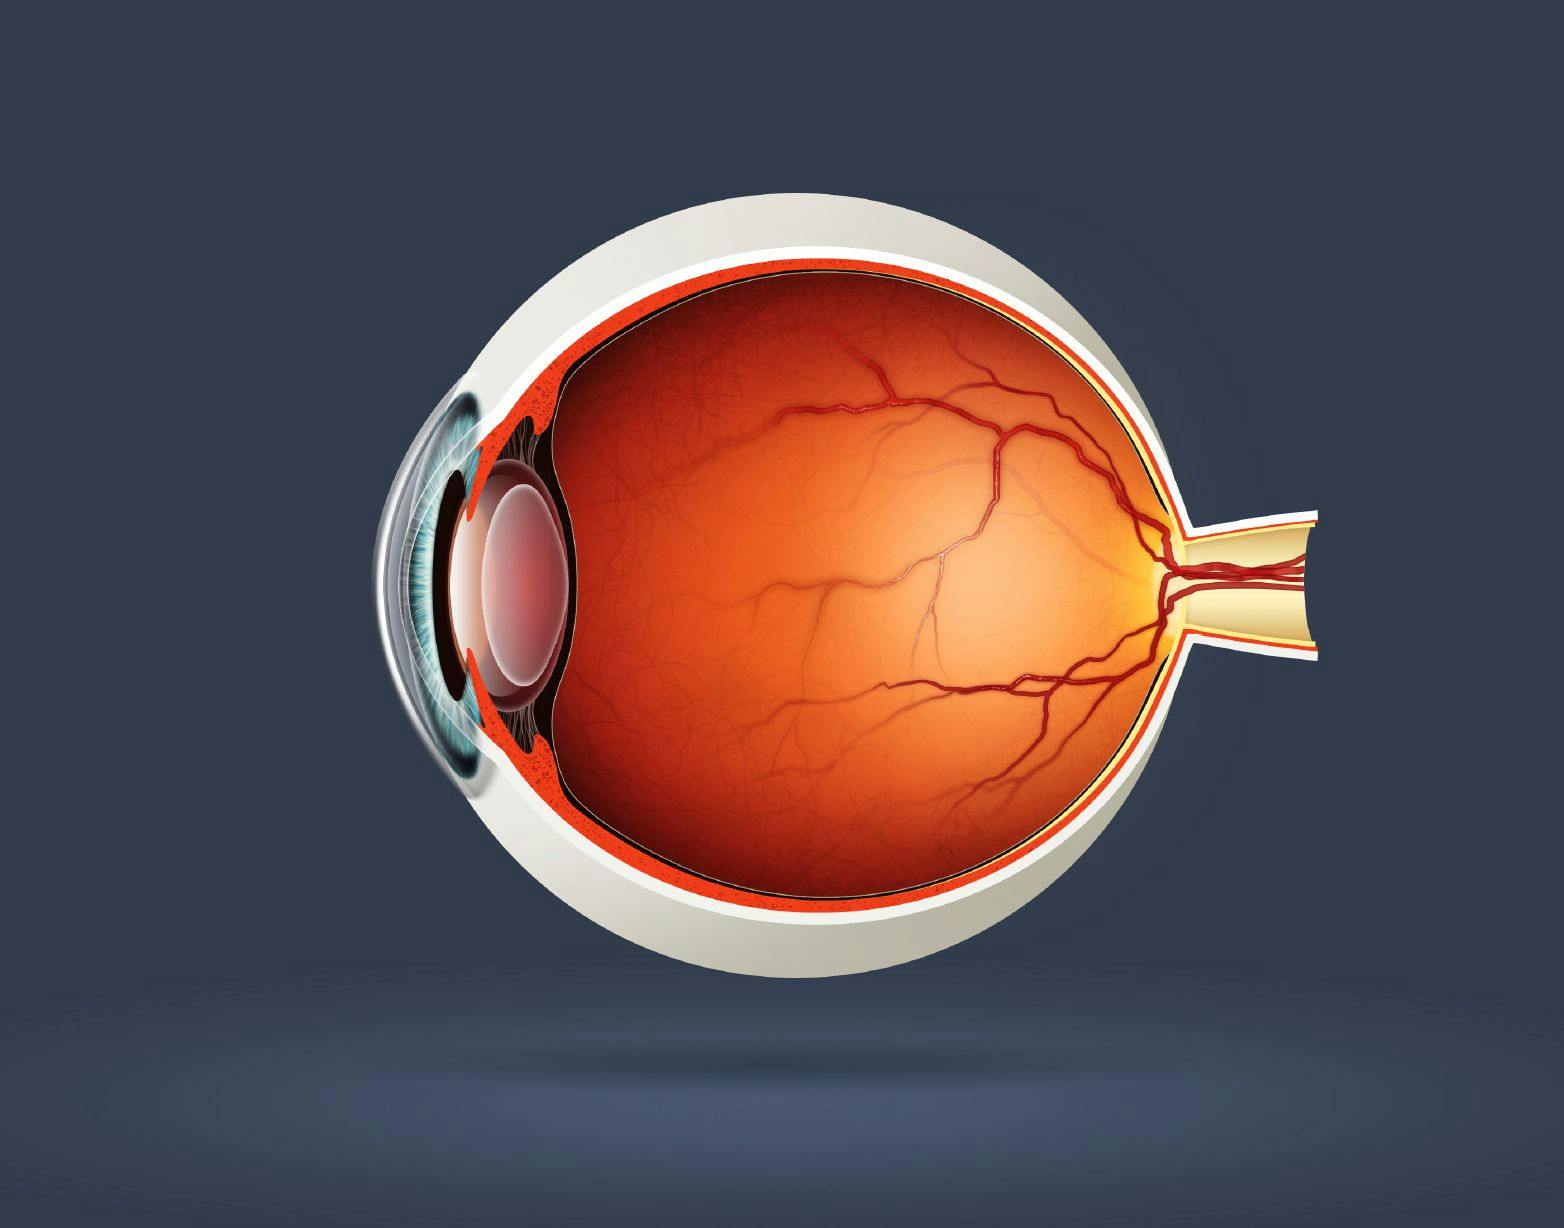 Opinion: Is the Ophthalmology Market Ready to Embrace Biosimilars?